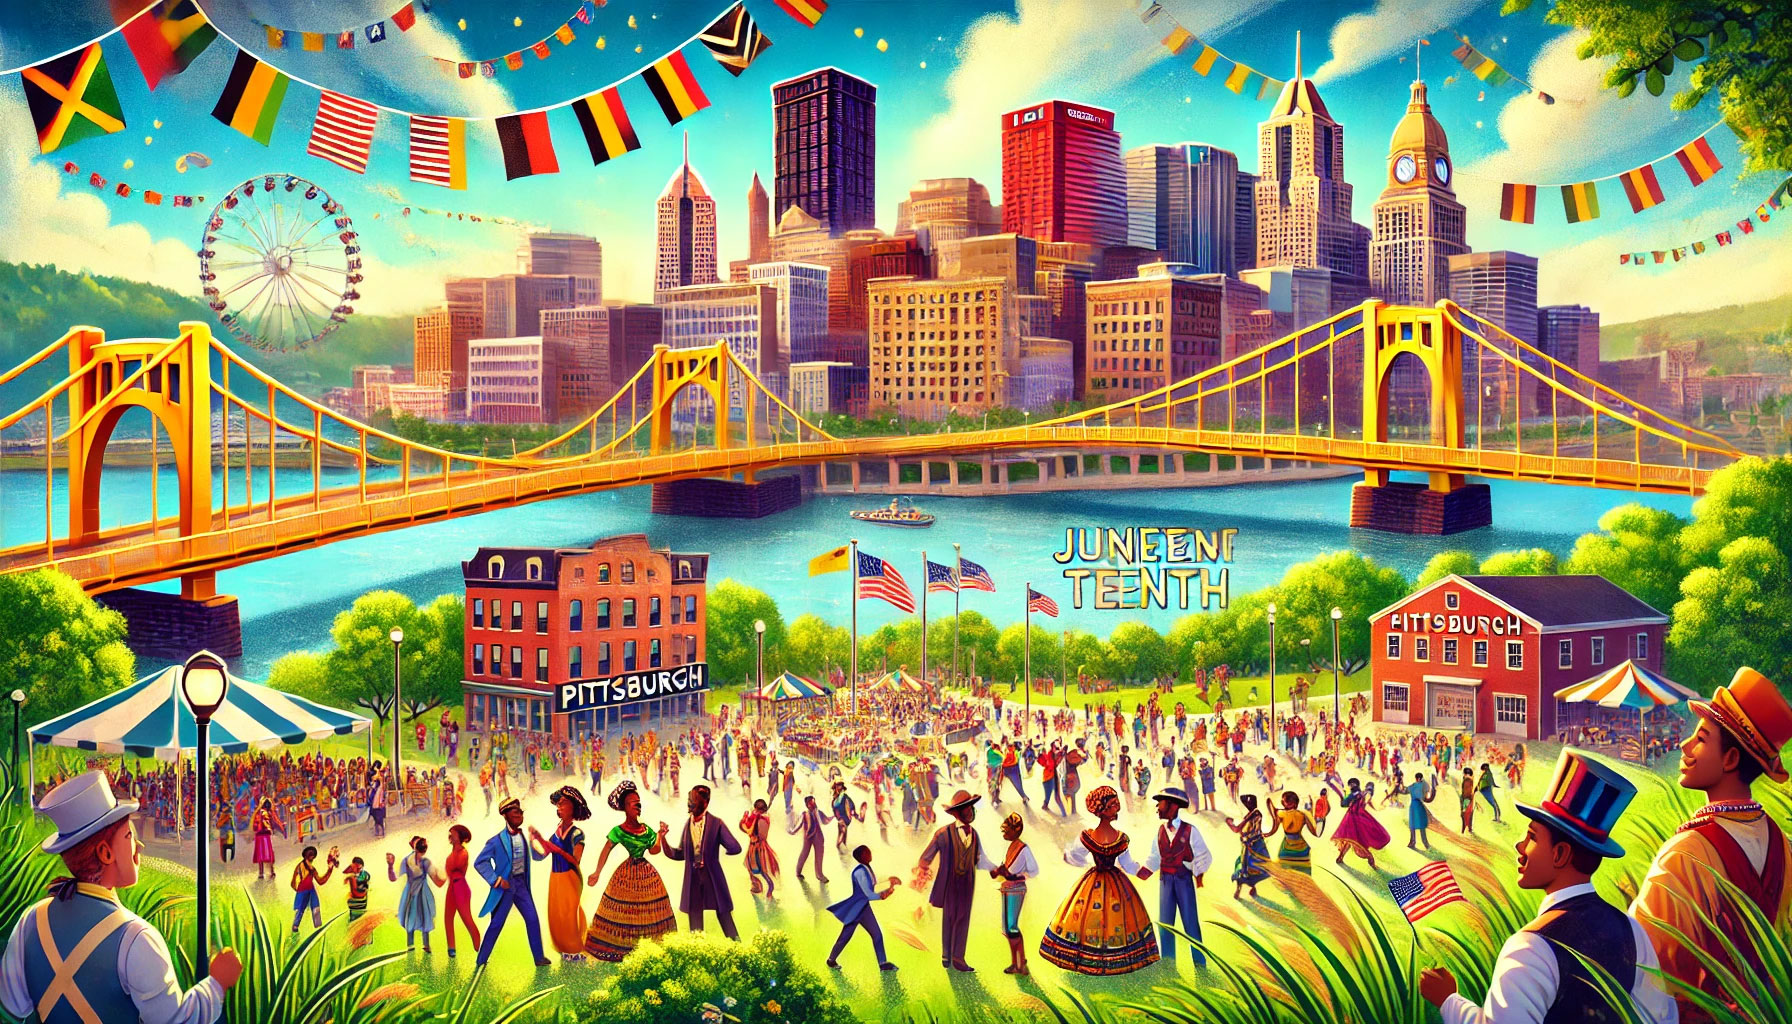 Pittsburgh Juneteenth Graphic